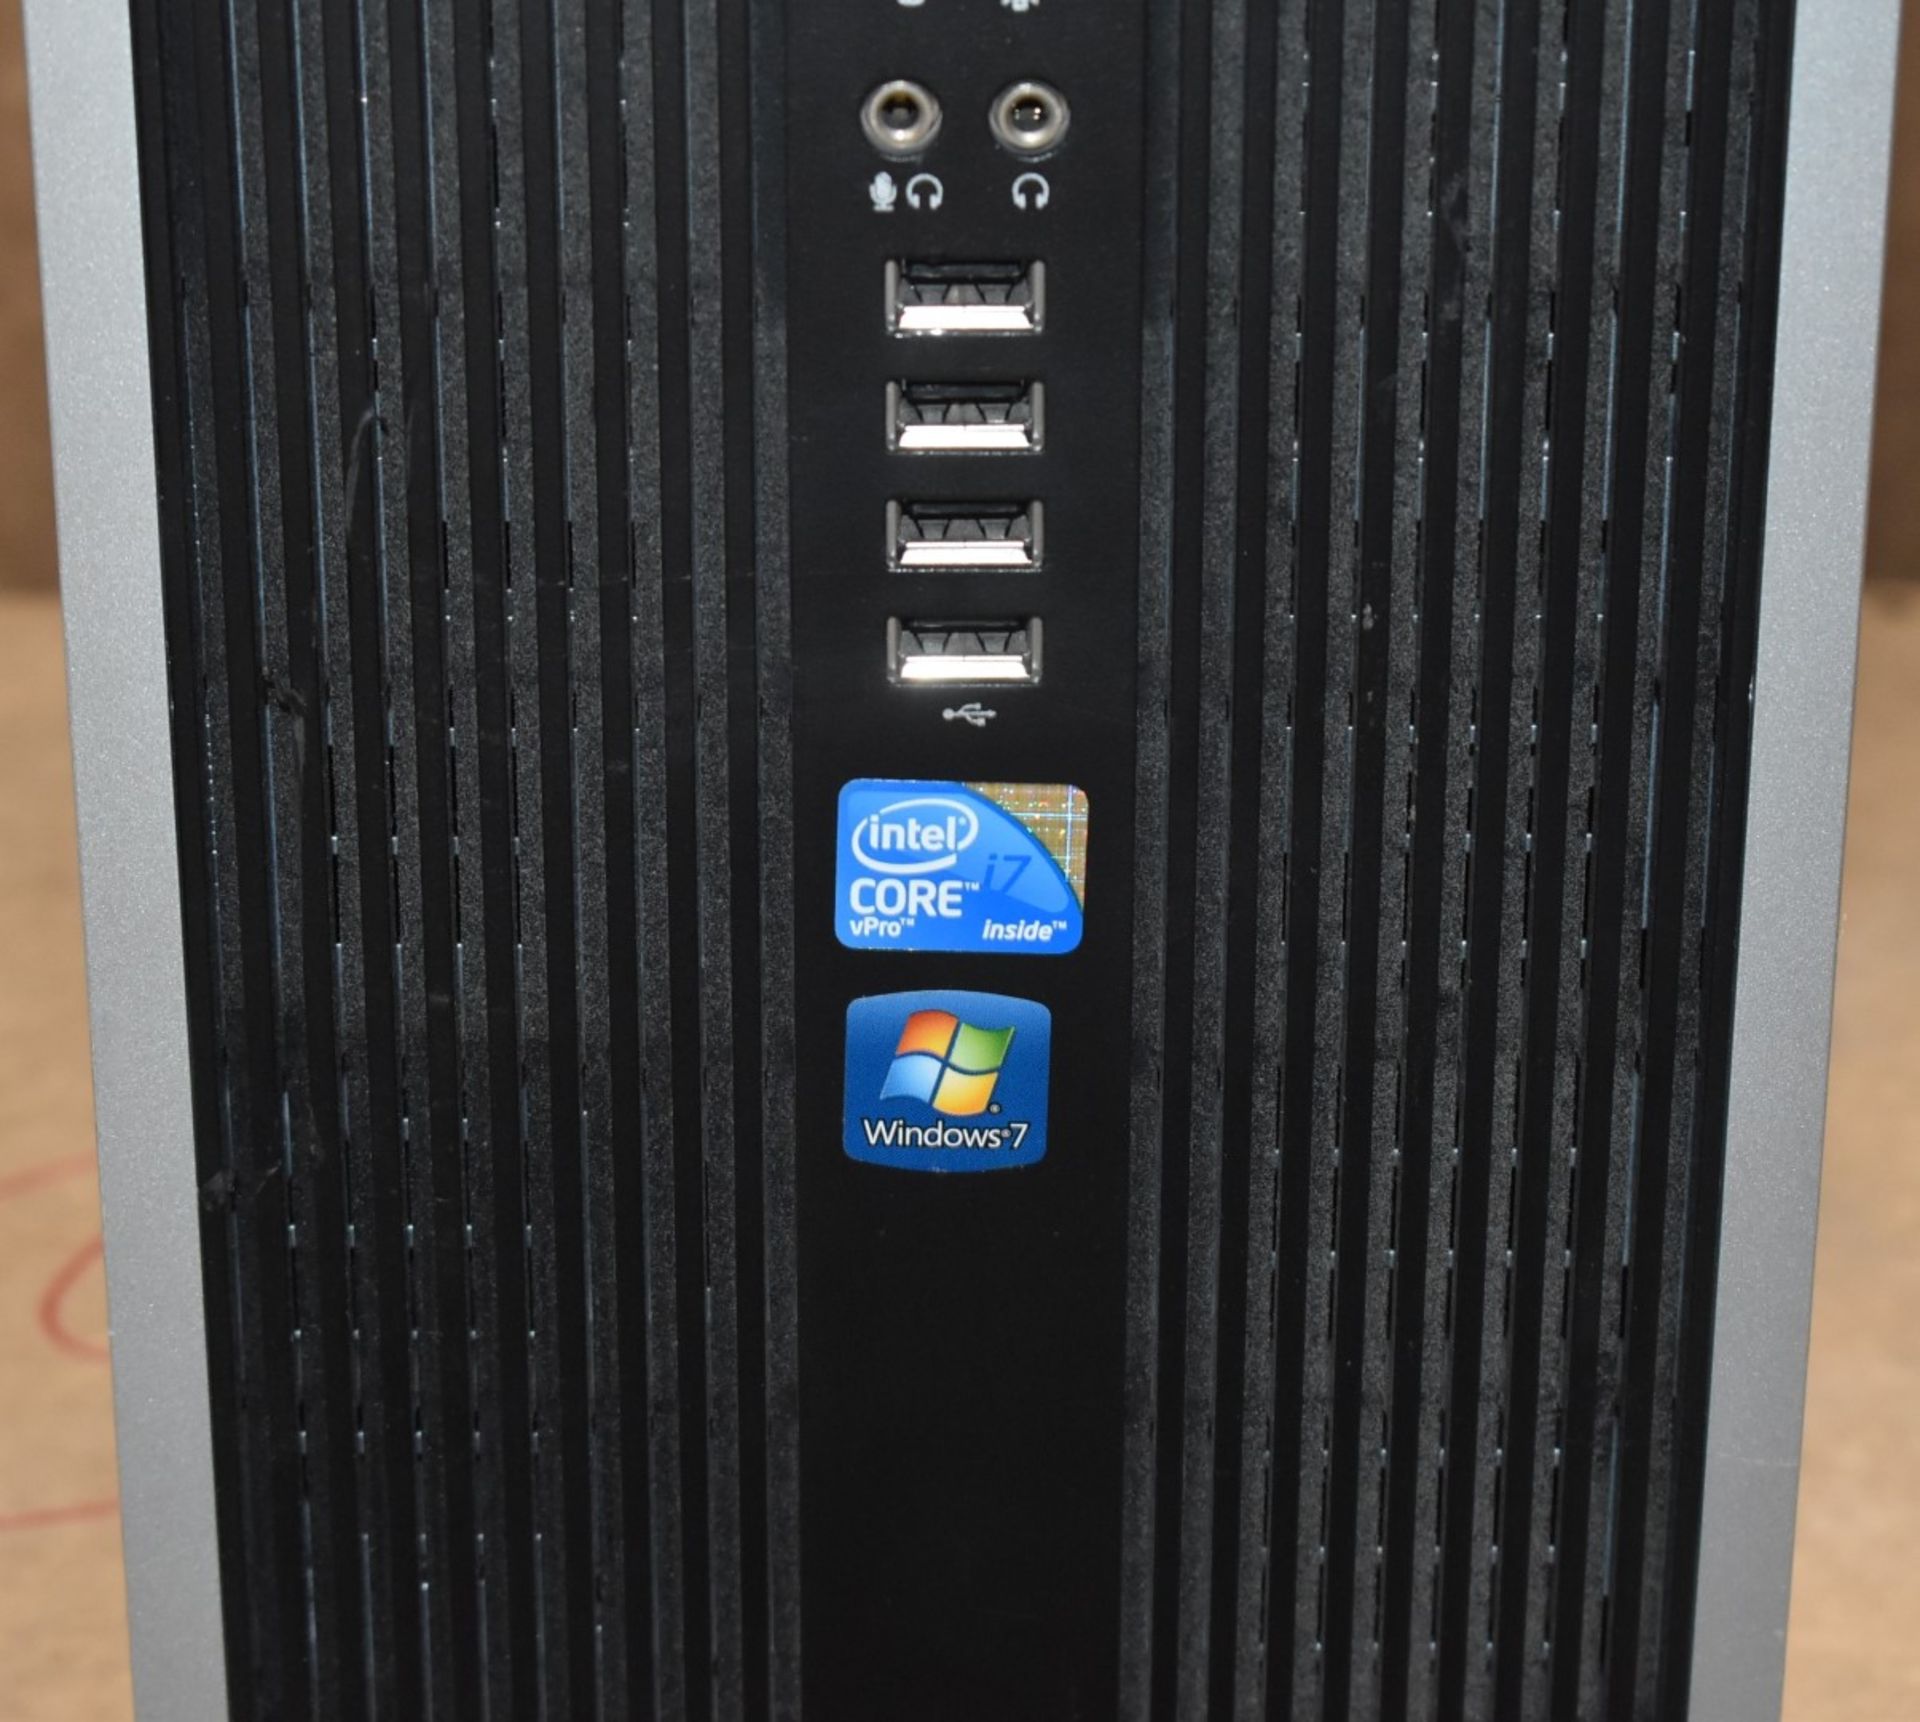 1 x HP Compaq 8100 Elite Mini Tower Desktop PC - Features an Intel i7 Processor and 4gb Ram - Spares - Image 2 of 5